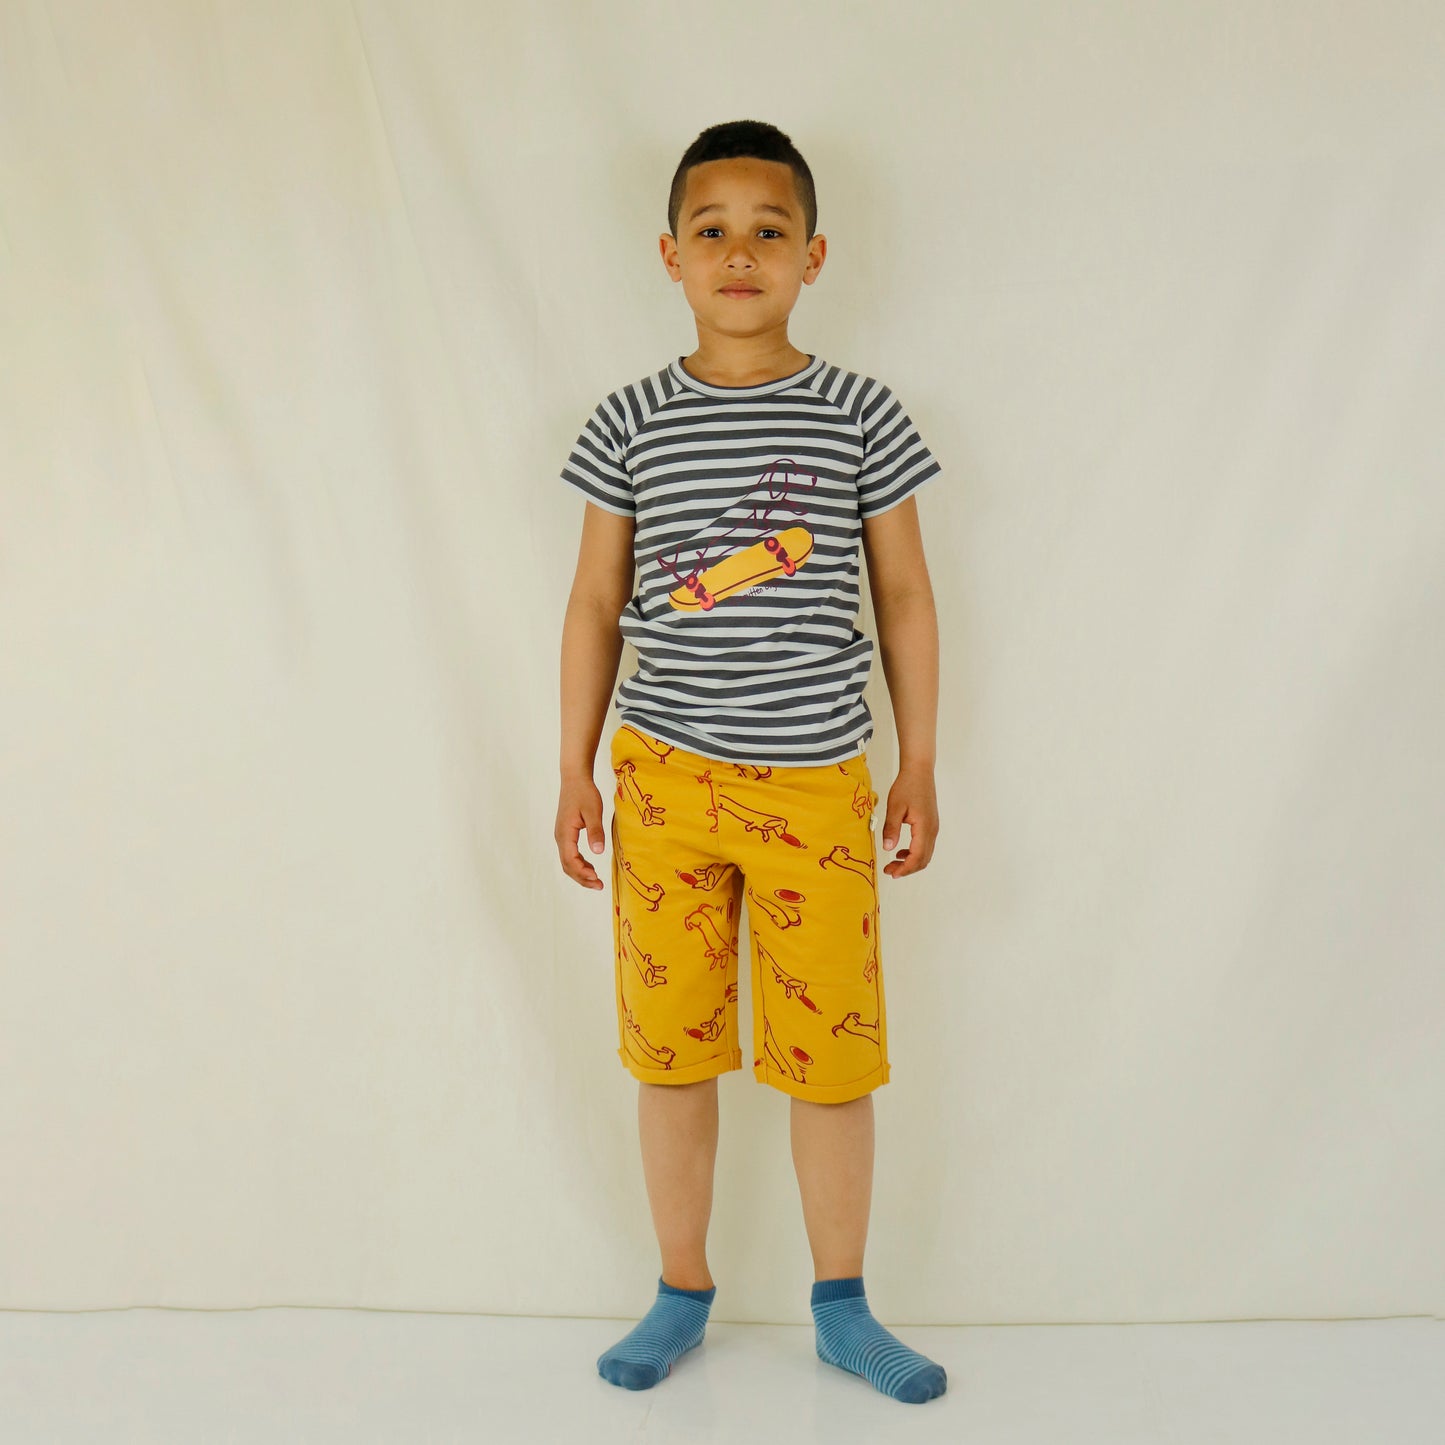 Billy With Skateboard Print On Striped Short Sleeve T-Shirt